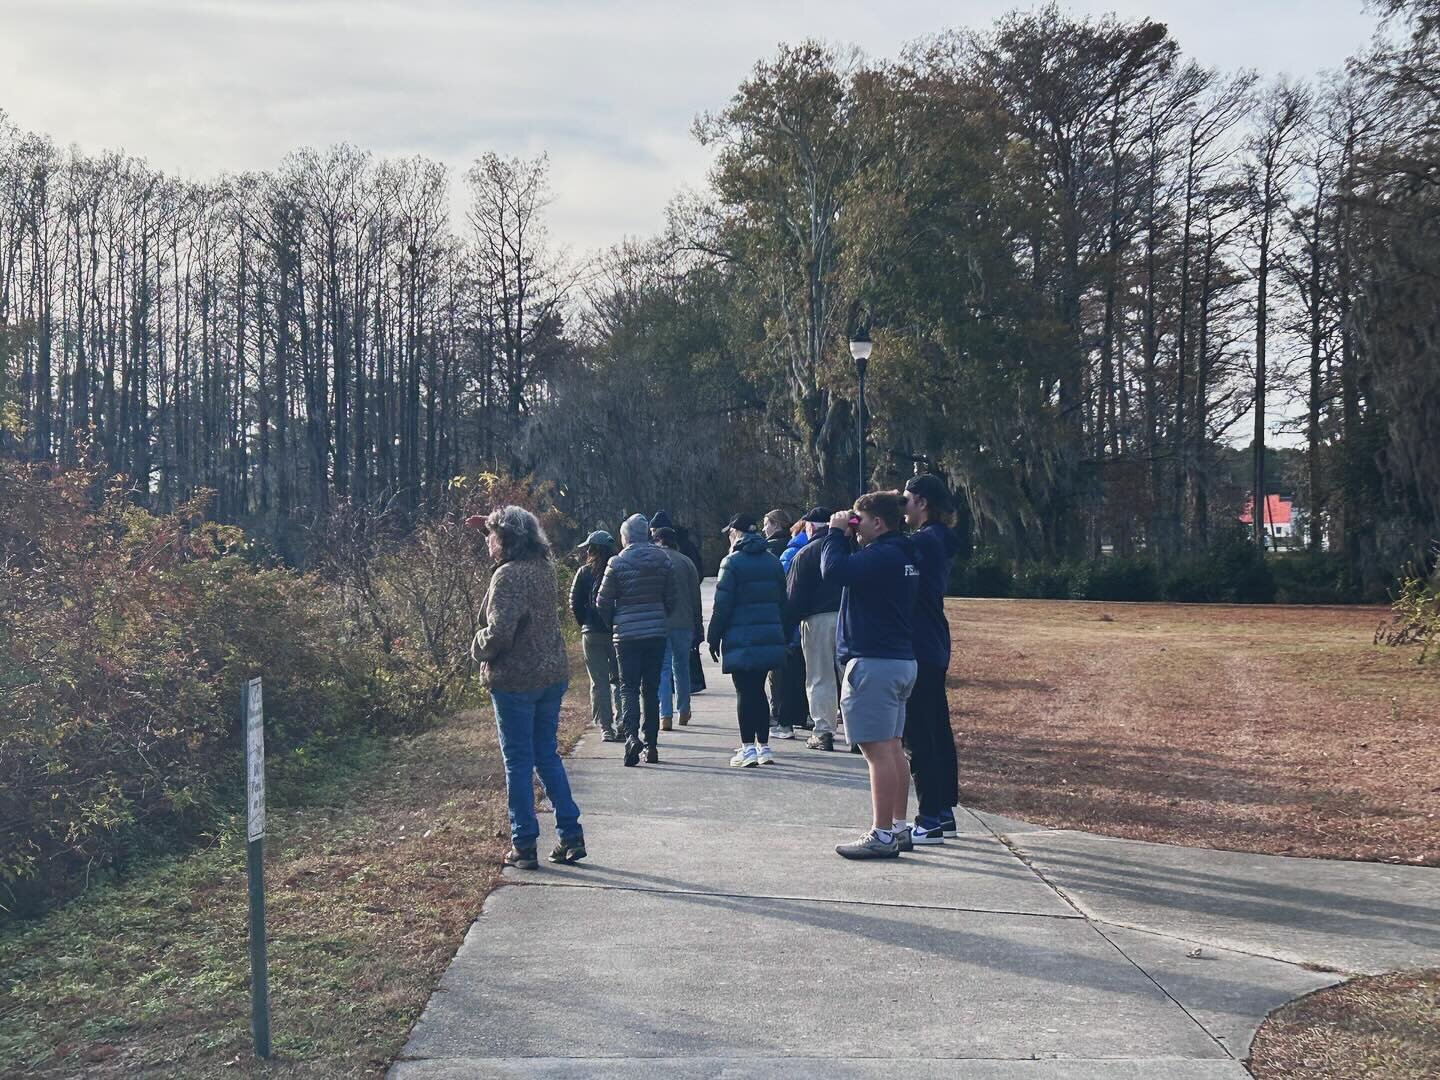 Thanks to everyone who joined us yesterday on our monthly Greenfield Lake family nature walk! It was a cool and crisp morning, perfect for winter birding! We had great views and great times! Please join us on January 5th for a nature walk on #nationa